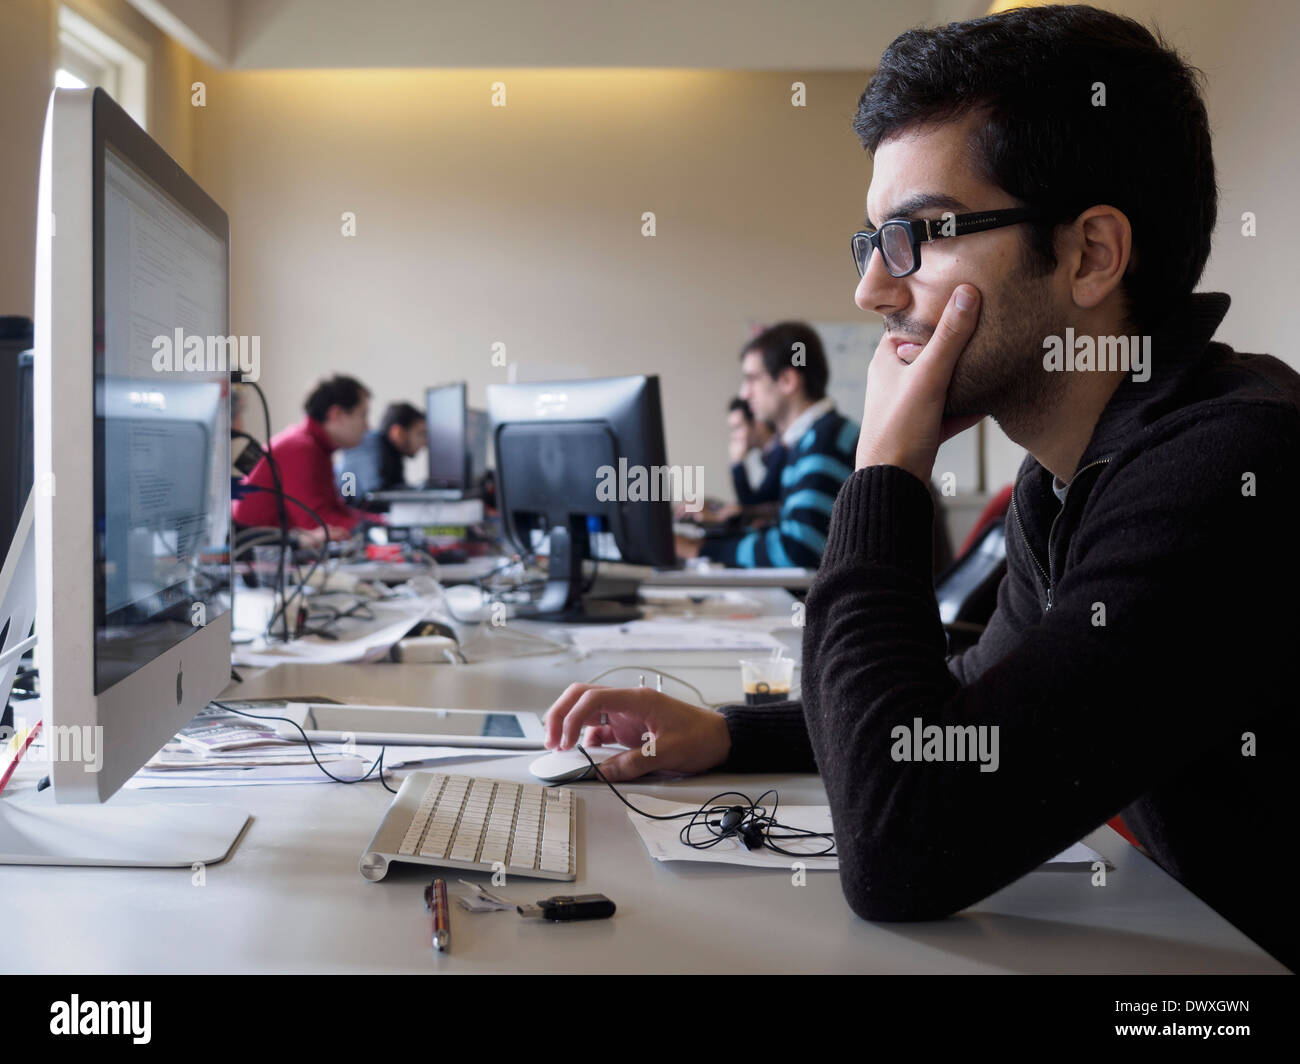 One man using an Apple iMac computer in an open space office Stock Photo